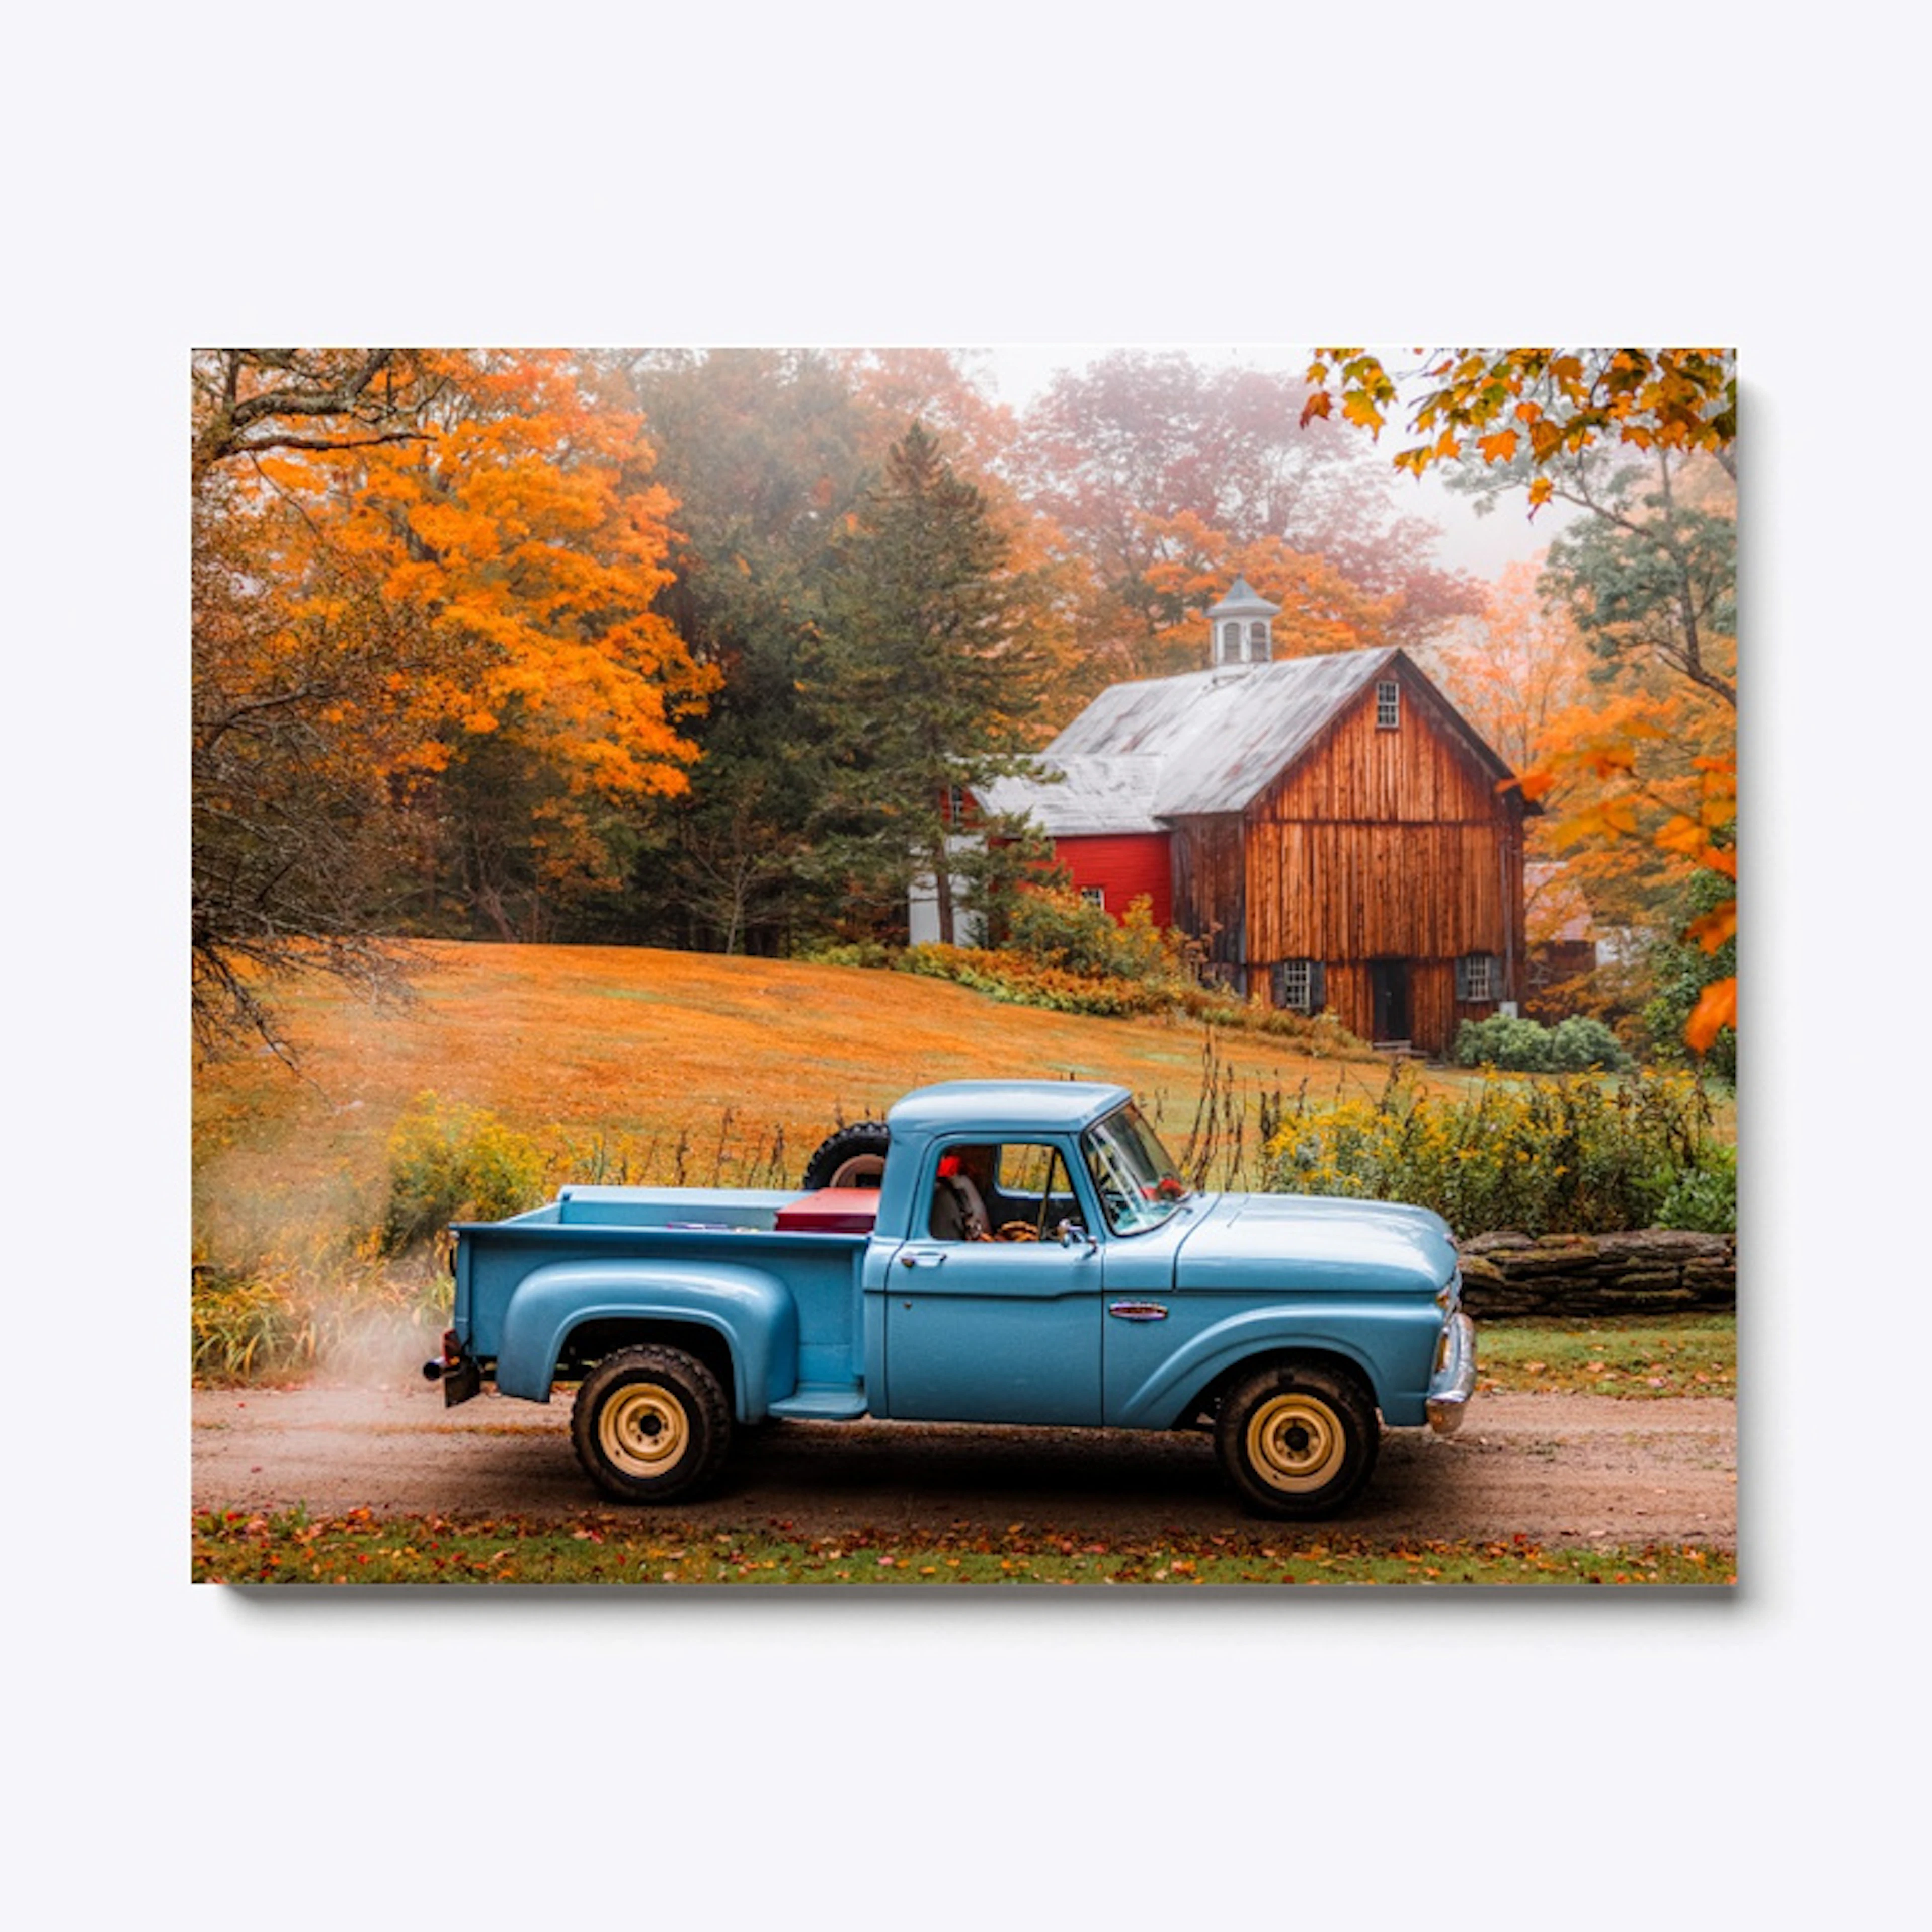 Autumn in the Countryside Canvas